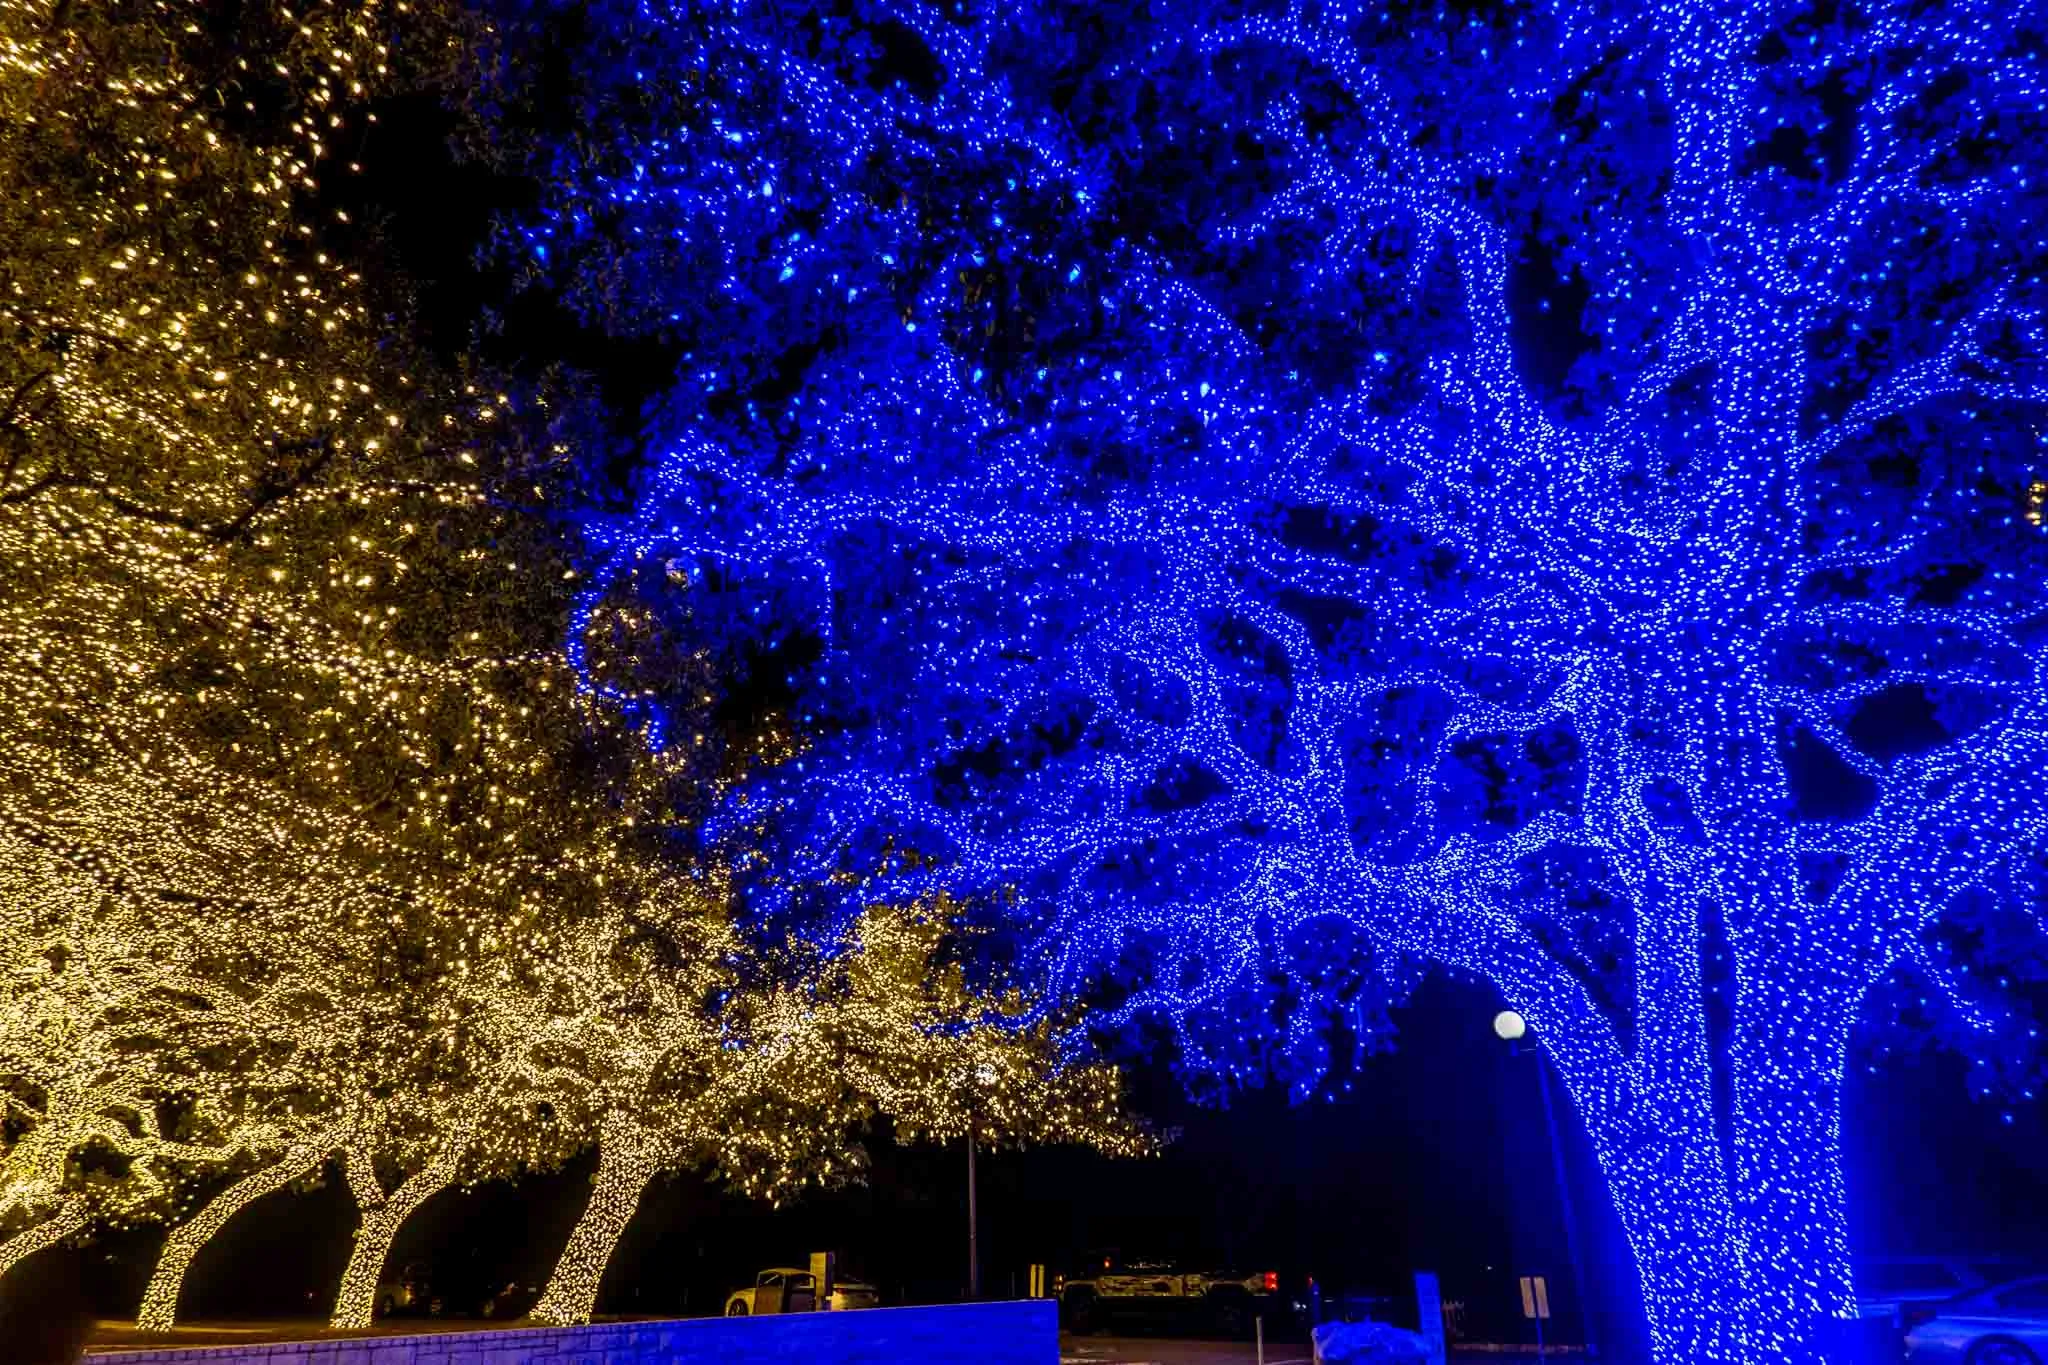 Trees completely covered in white lights beside trees completely covered in blue Christmas lights at night